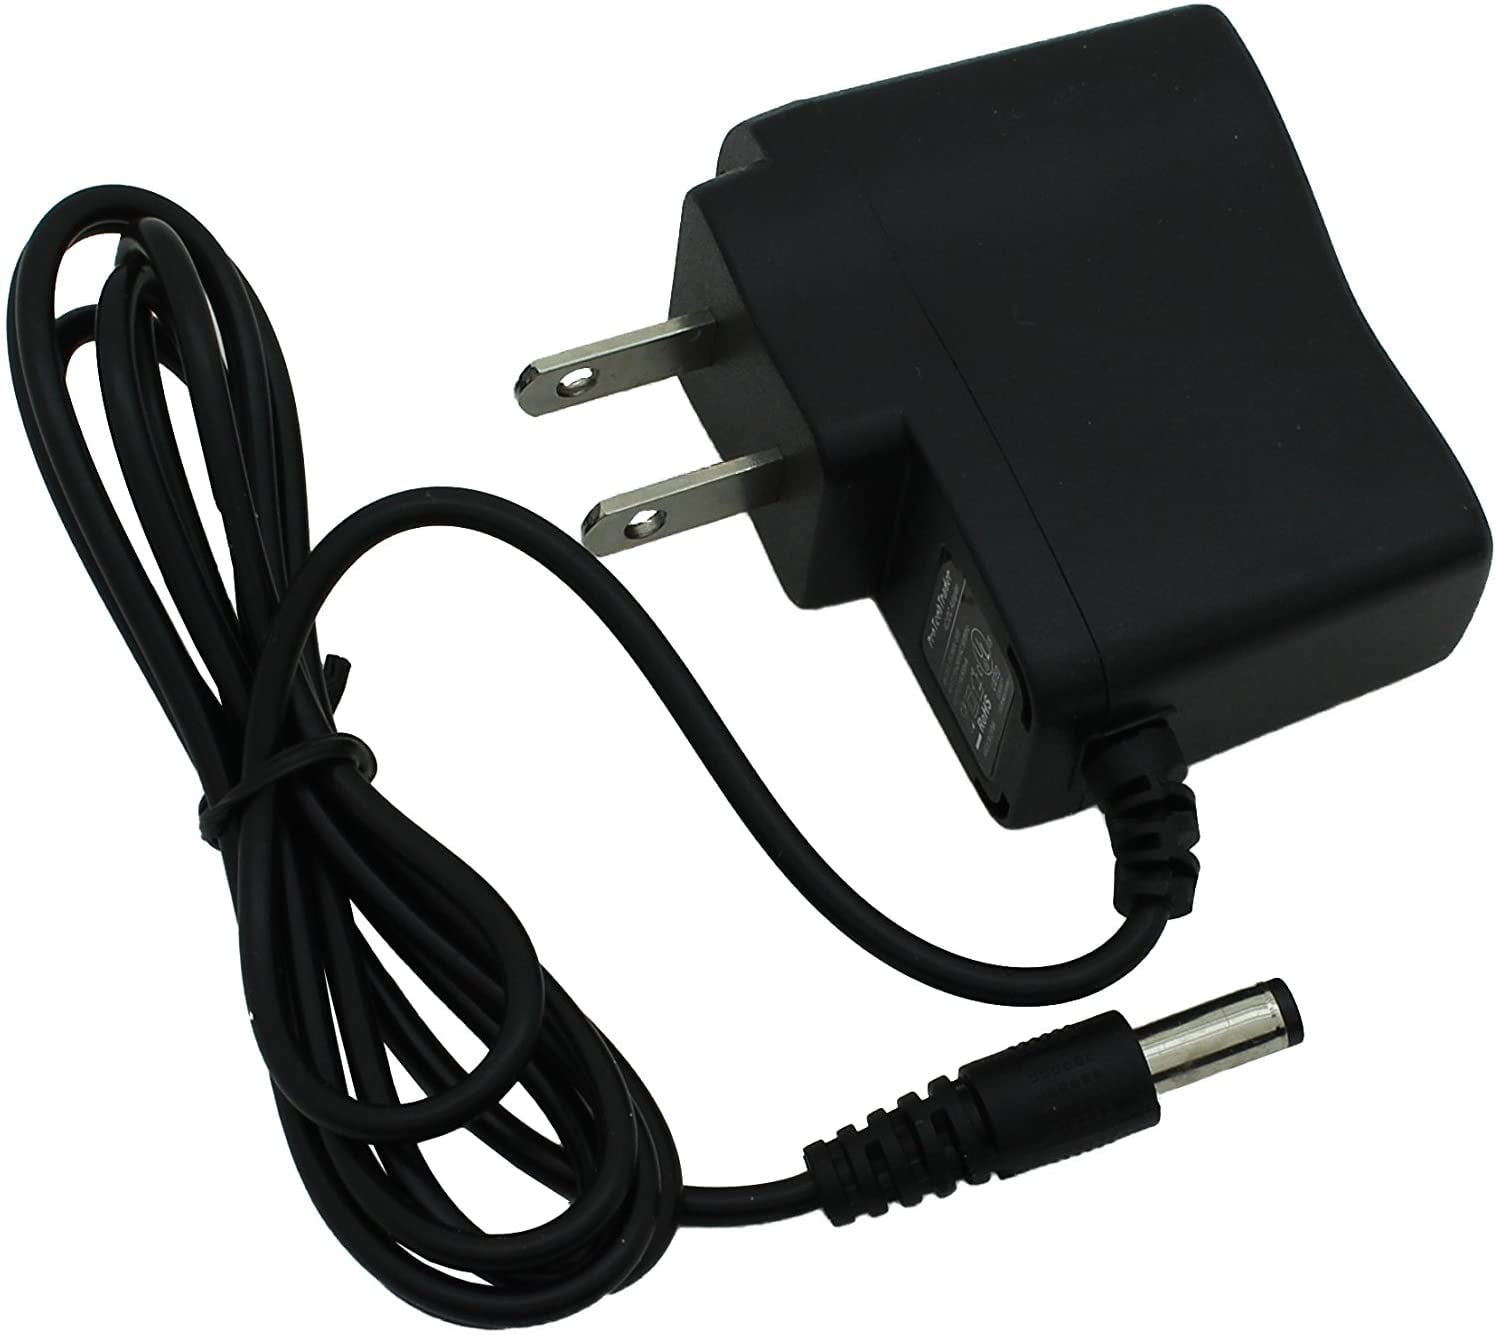 Baffle Belongs Rise 9V AC/DC Power Supply Adapter 500ma (0.5 amps) AC to DC Electric  Transformer Inverter for Small 9-Volt DC Electronic Devices Under 0.5a -  Walmart.com